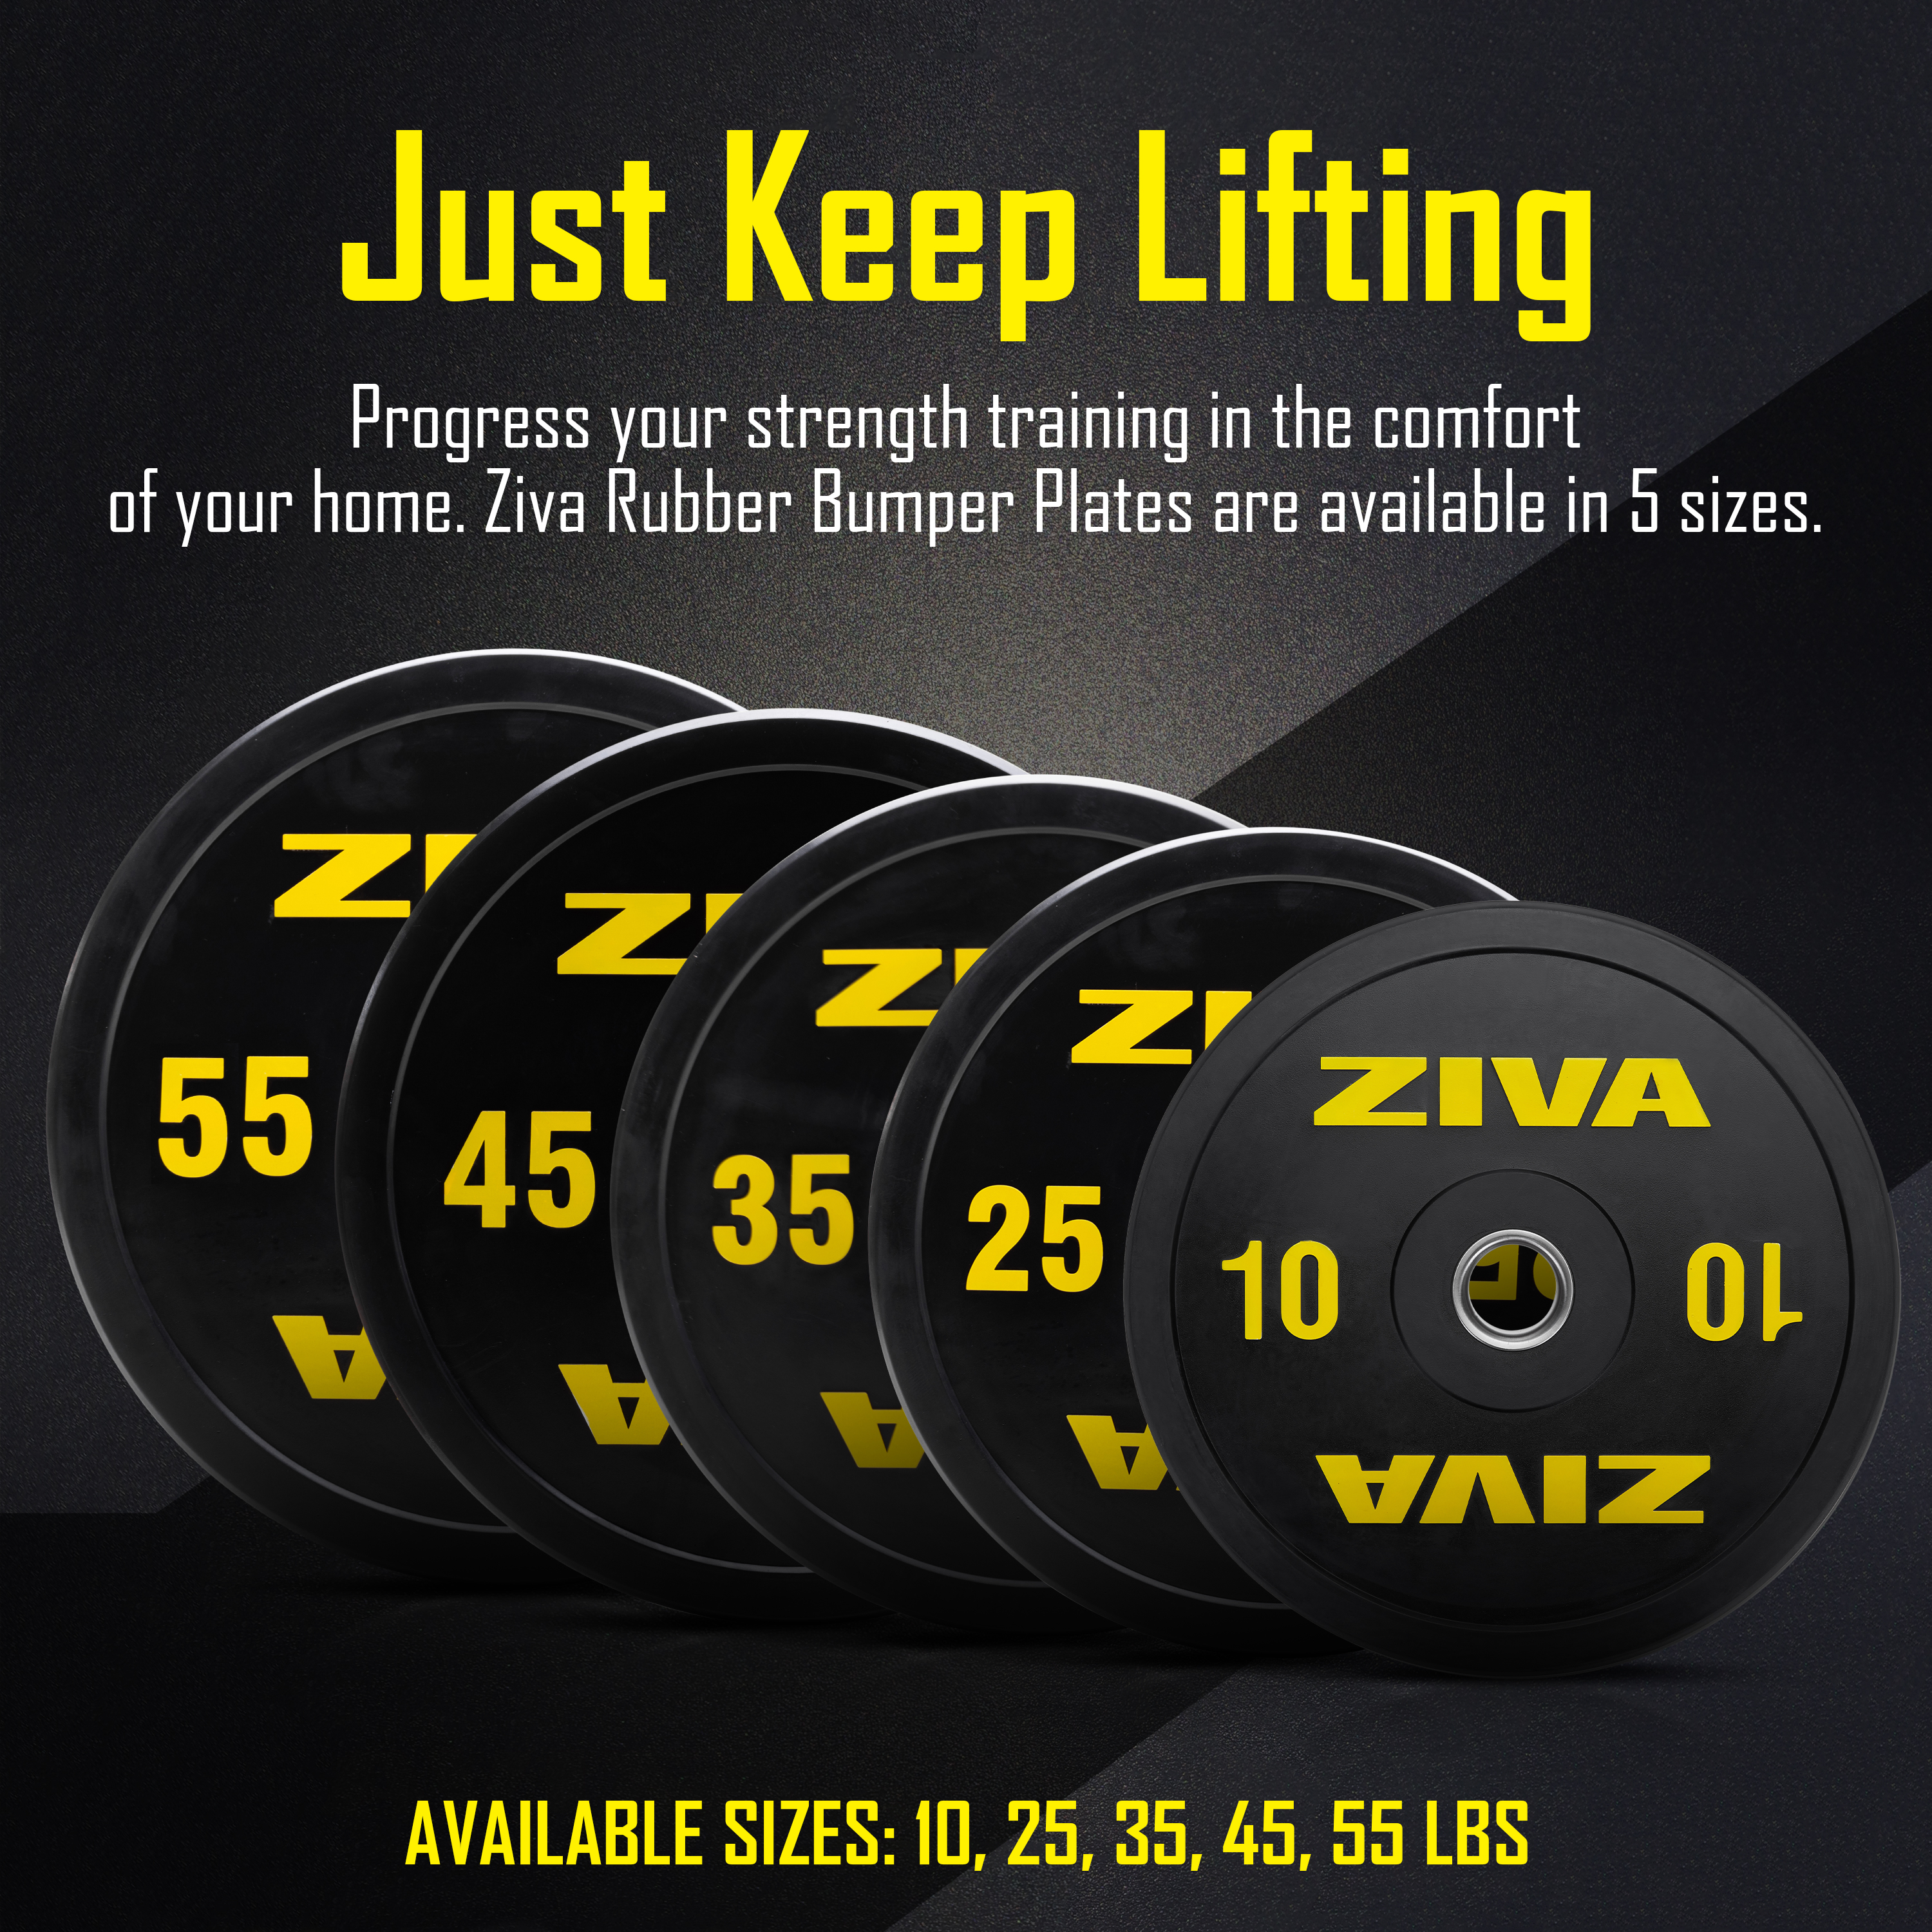 Just keep lifting. Progress your strength training in the comfort of your home. Ziva rubber bumper plates are available in 5 sizes. Available sizes: 10, 25, 35, 45, 55 lbs.